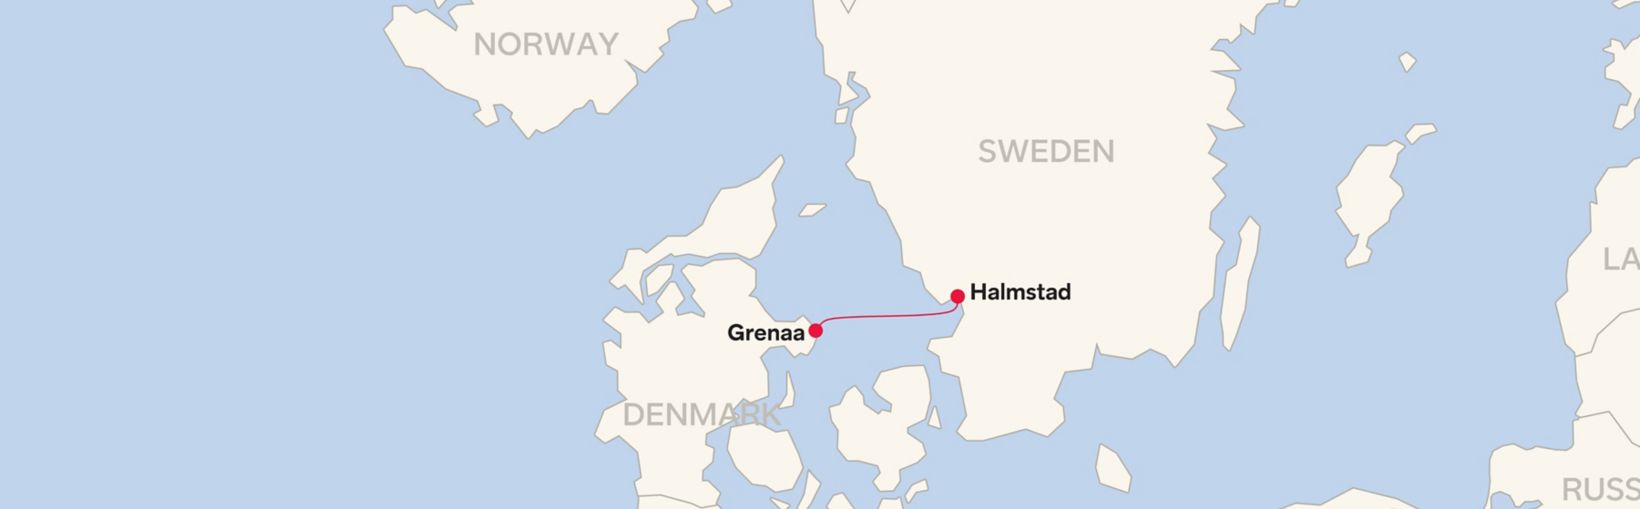 Route map for Halmstad – Grenaa